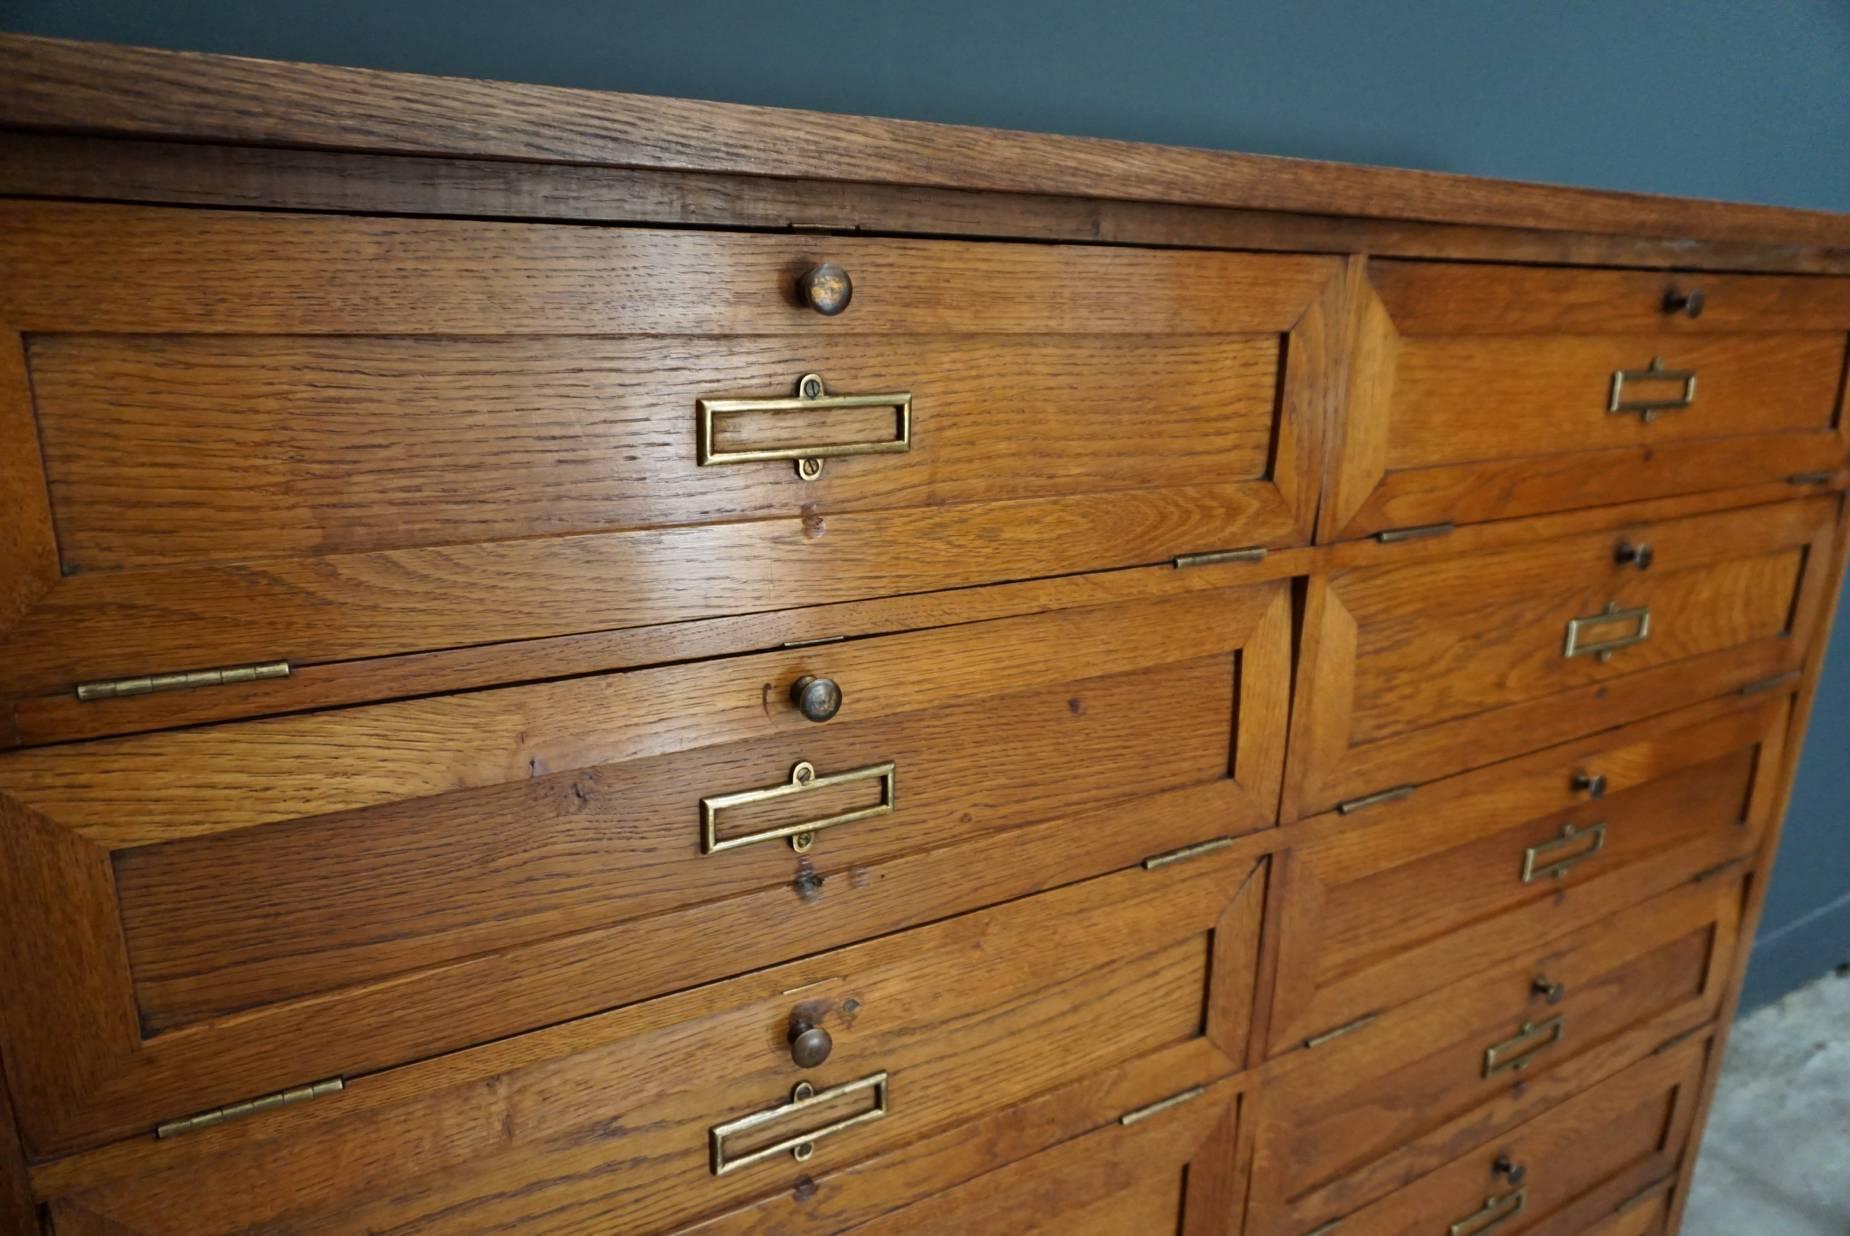 These French oak cabinets were designed and made, circa 1900 in France. They feature 14 compartments with drop down doors that were used to store files. They were previously owned and used by the bank of France. They are listed as separate items, if